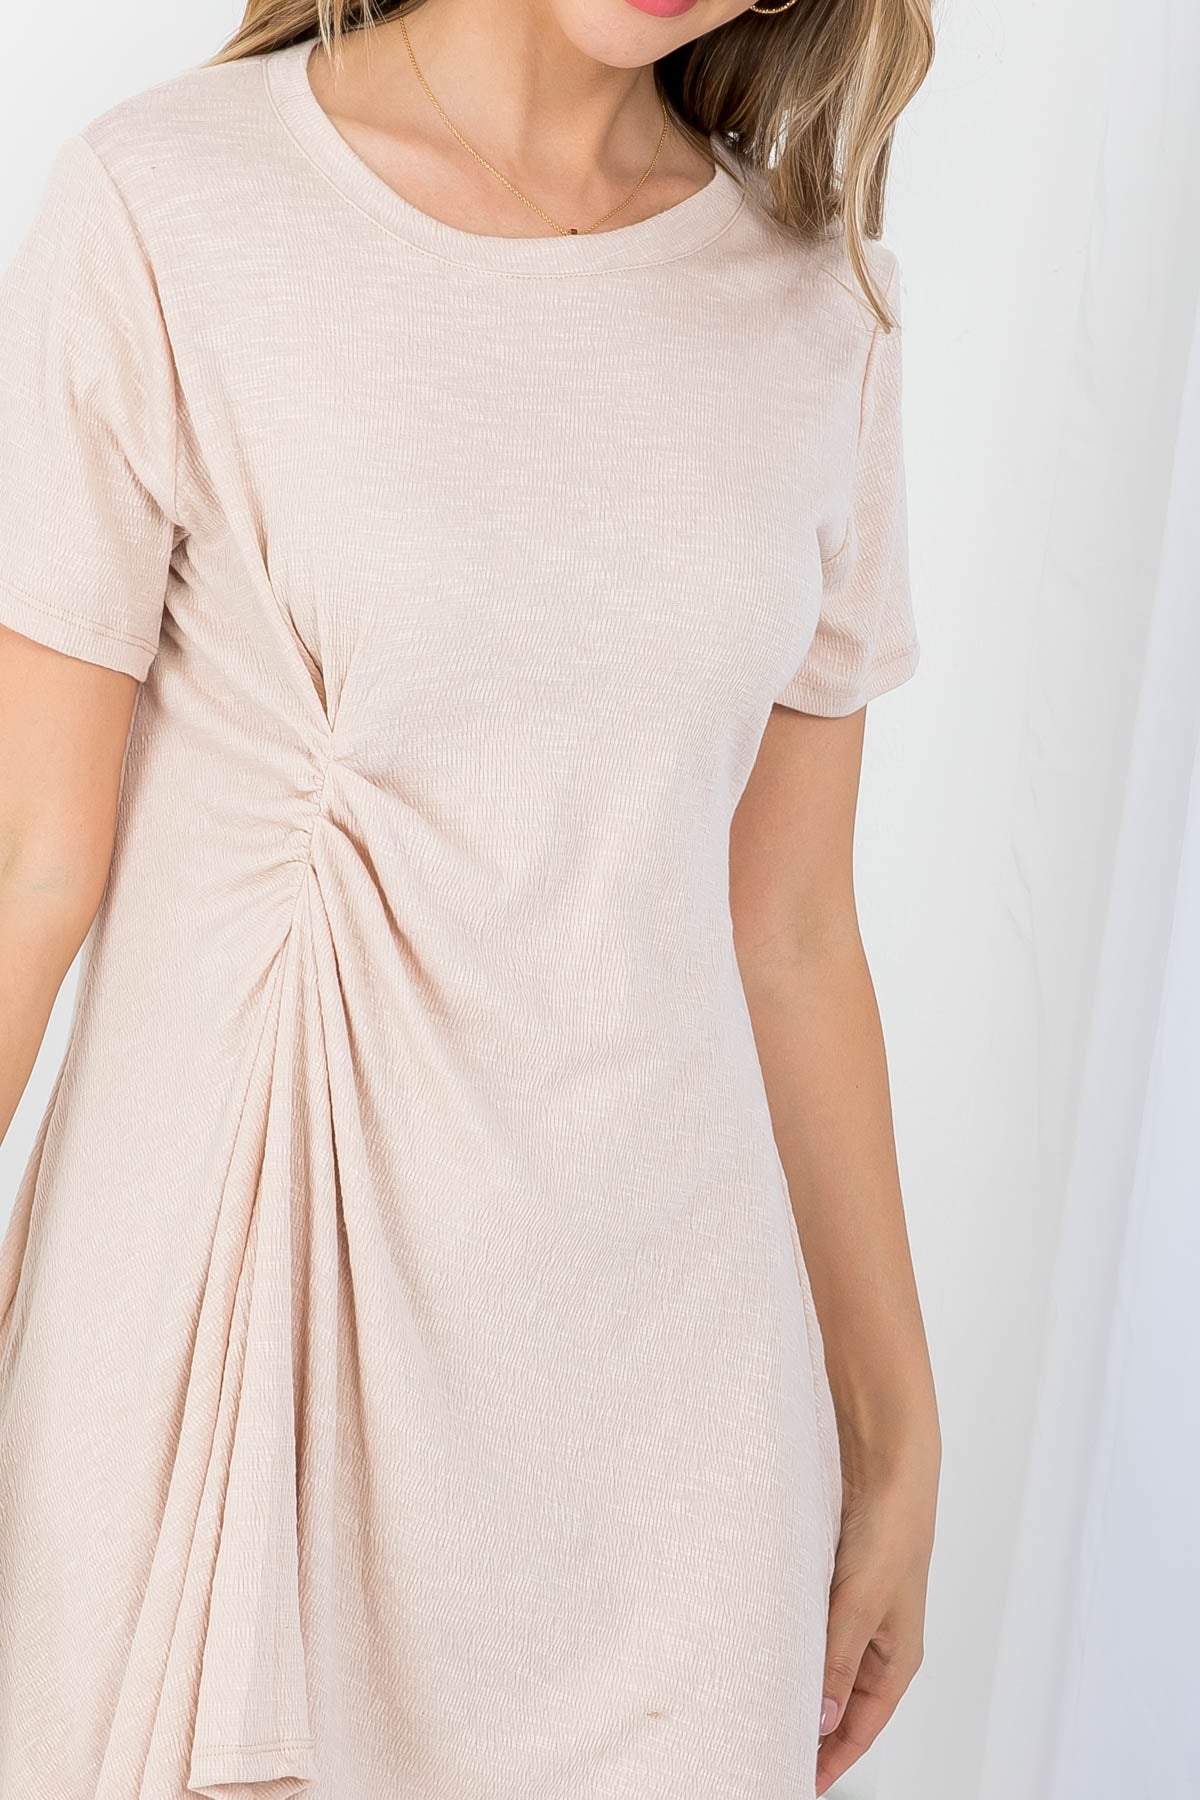 BLUSH SCOOPED NECKLINE WITH RIGHT SIDE RUCHED DRESS